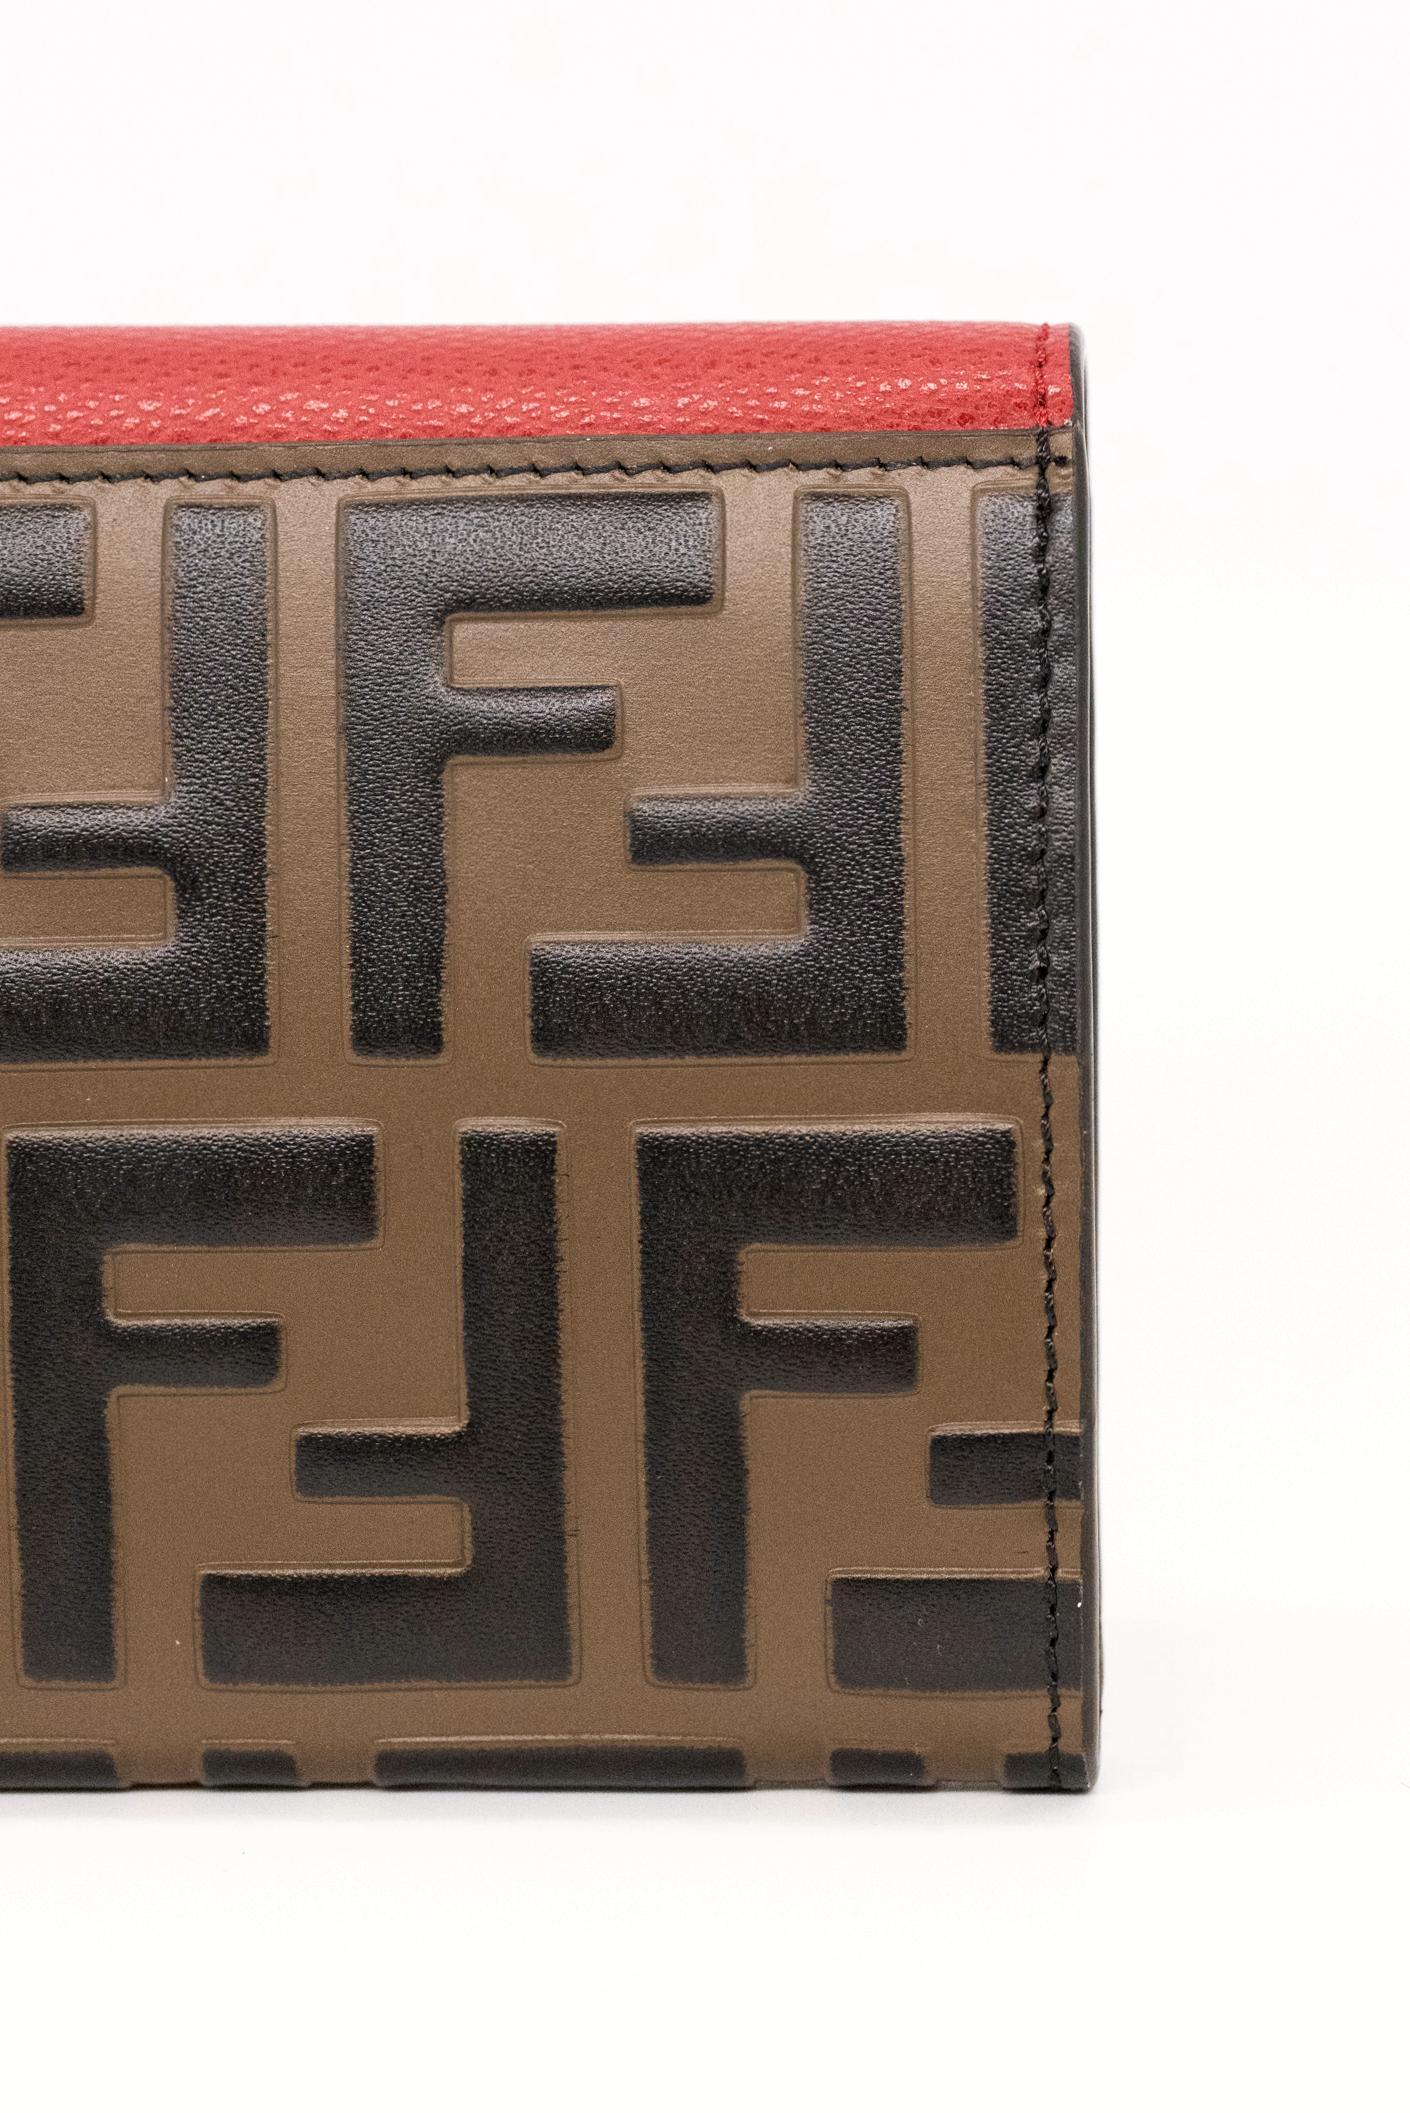 Fendi Continental Red Leather Embossed Wallet, 2020. For Sale 5